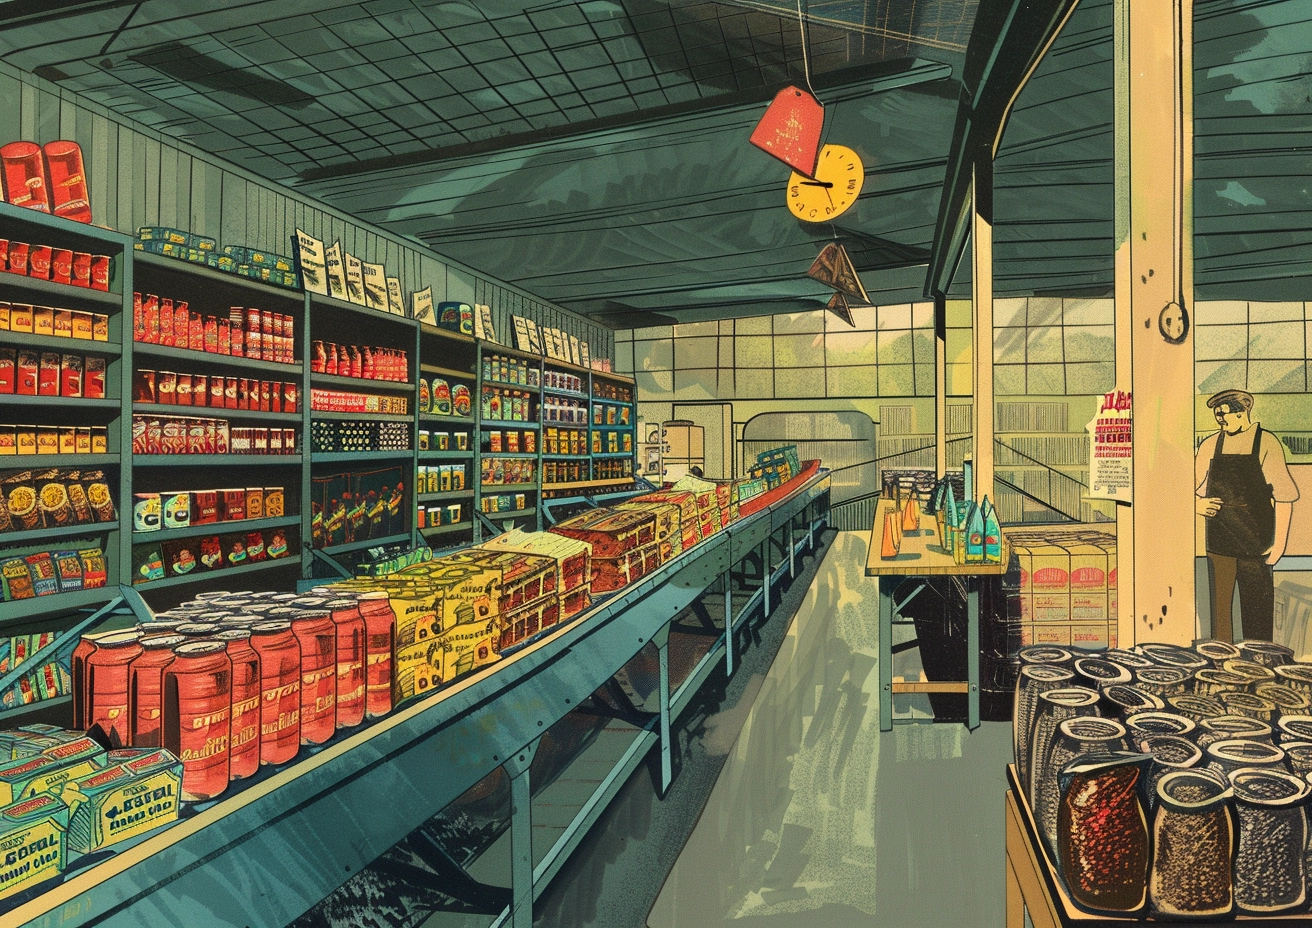 Dope illustration of an old-timey market store.